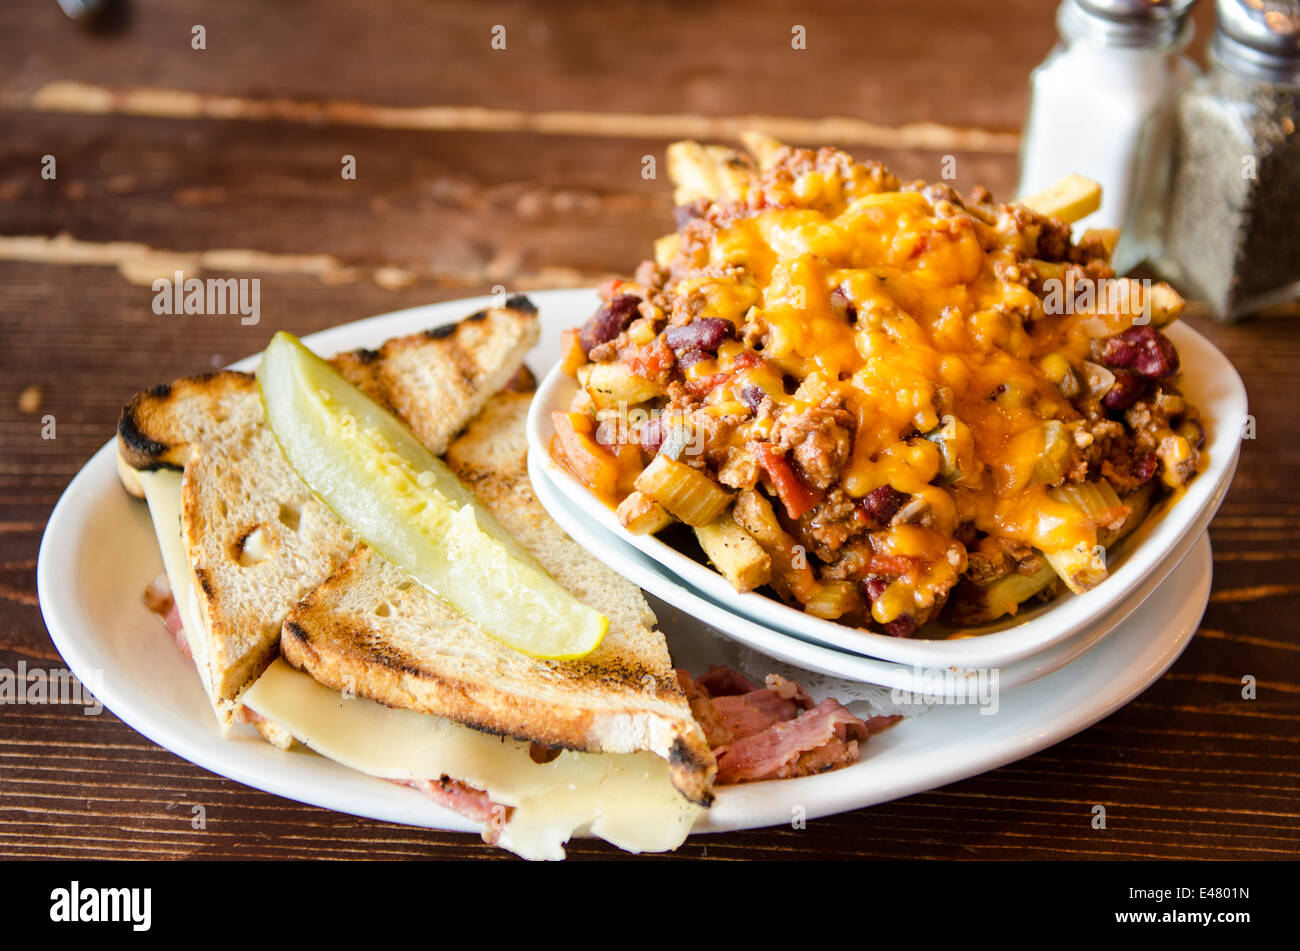 Ham and cheese sandwich with chili and chips at Nancy O's Restaurant, Prince George, British Columbia, Canada. Stock Photo